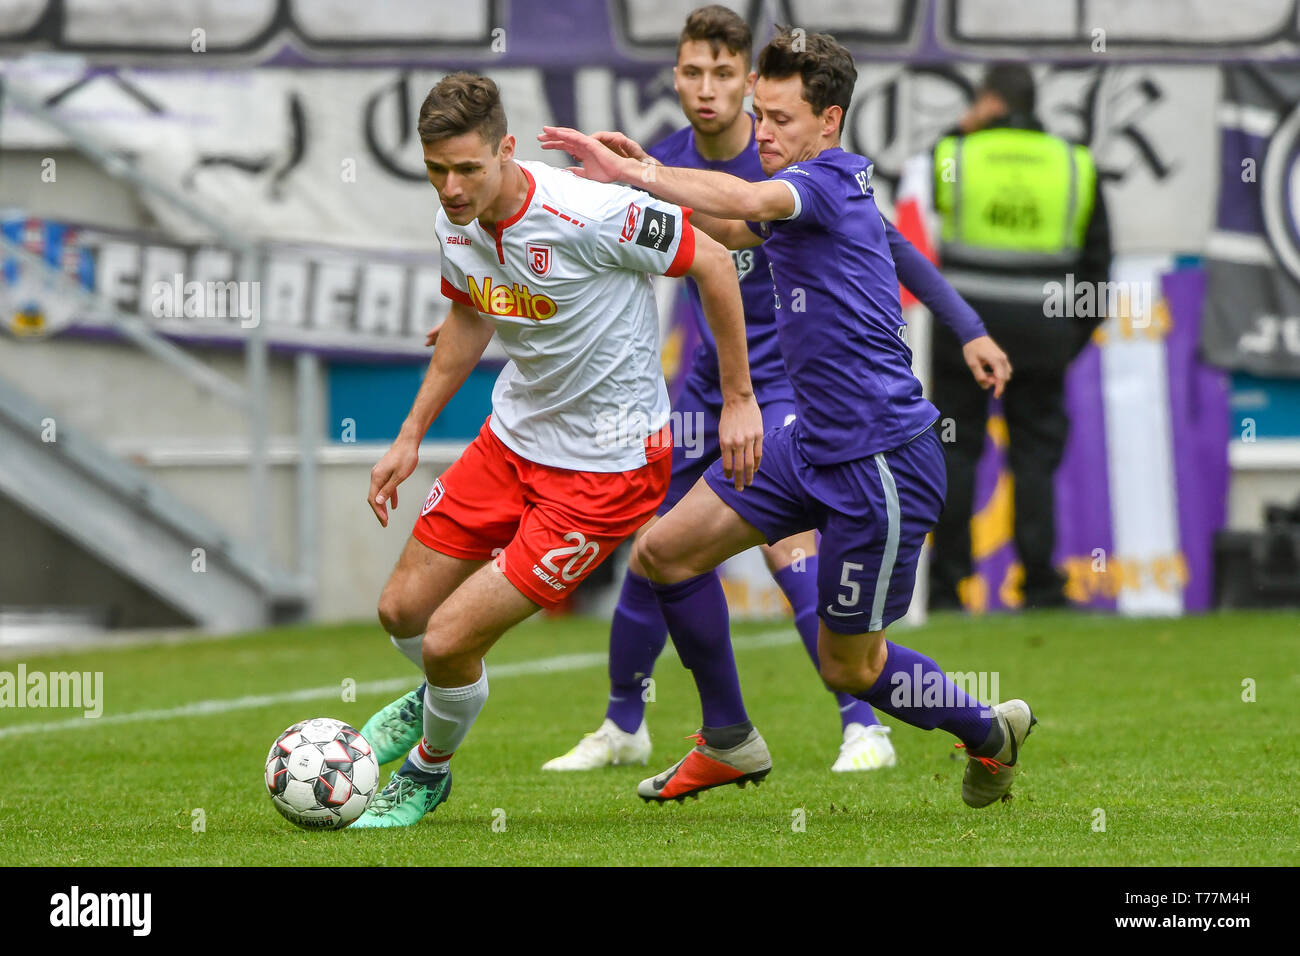 Regensburg, Germany. 05th May, 2019. Soccer: 2nd Bundesliga, Jahn Regensburg - Erzgebirge Aue, 32nd matchday in the Continental Arena. Maximilian Thalhammer of Regensburg (l) and Clemens Fandrich of Aue fight for the ball. Credit: Armin Weigel/dpa - IMPORTANT NOTE: In accordance with the requirements of the DFL Deutsche Fußball Liga or the DFB Deutscher Fußball-Bund, it is prohibited to use or have used photographs taken in the stadium and/or the match in the form of sequence images and/or video-like photo sequences./dpa/Alamy Live News Stock Photo